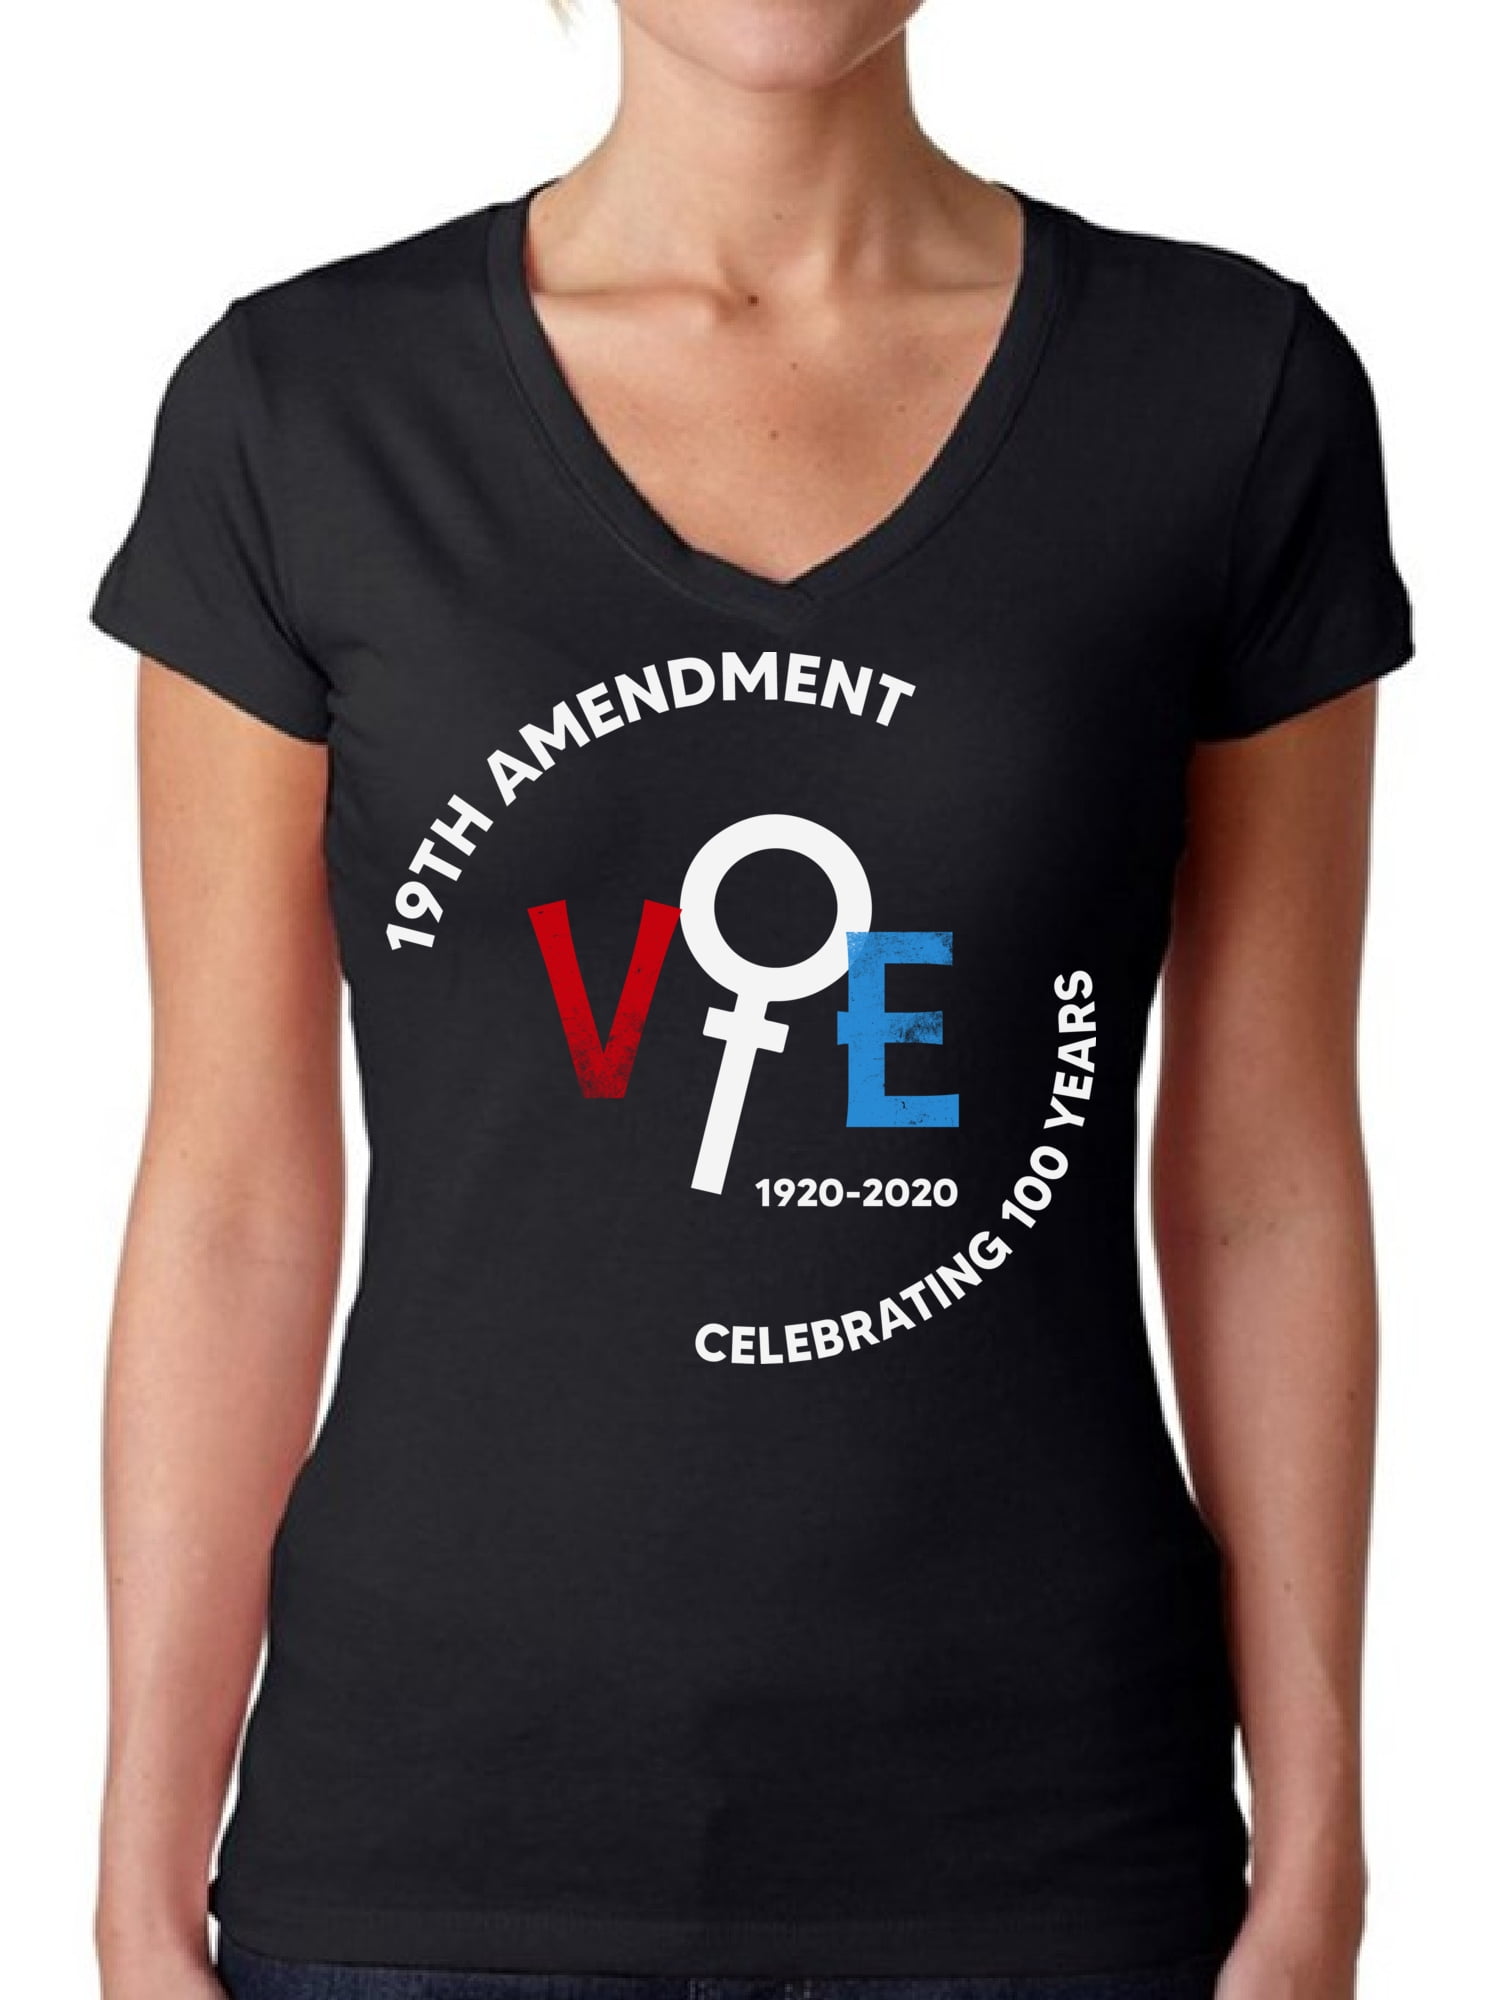 Right to Vote Feminism Tank 2020 Election Feminist Voting Like a Girl 19th Amendment Celebrating 100 Years Vote 1920-2020 Shirt